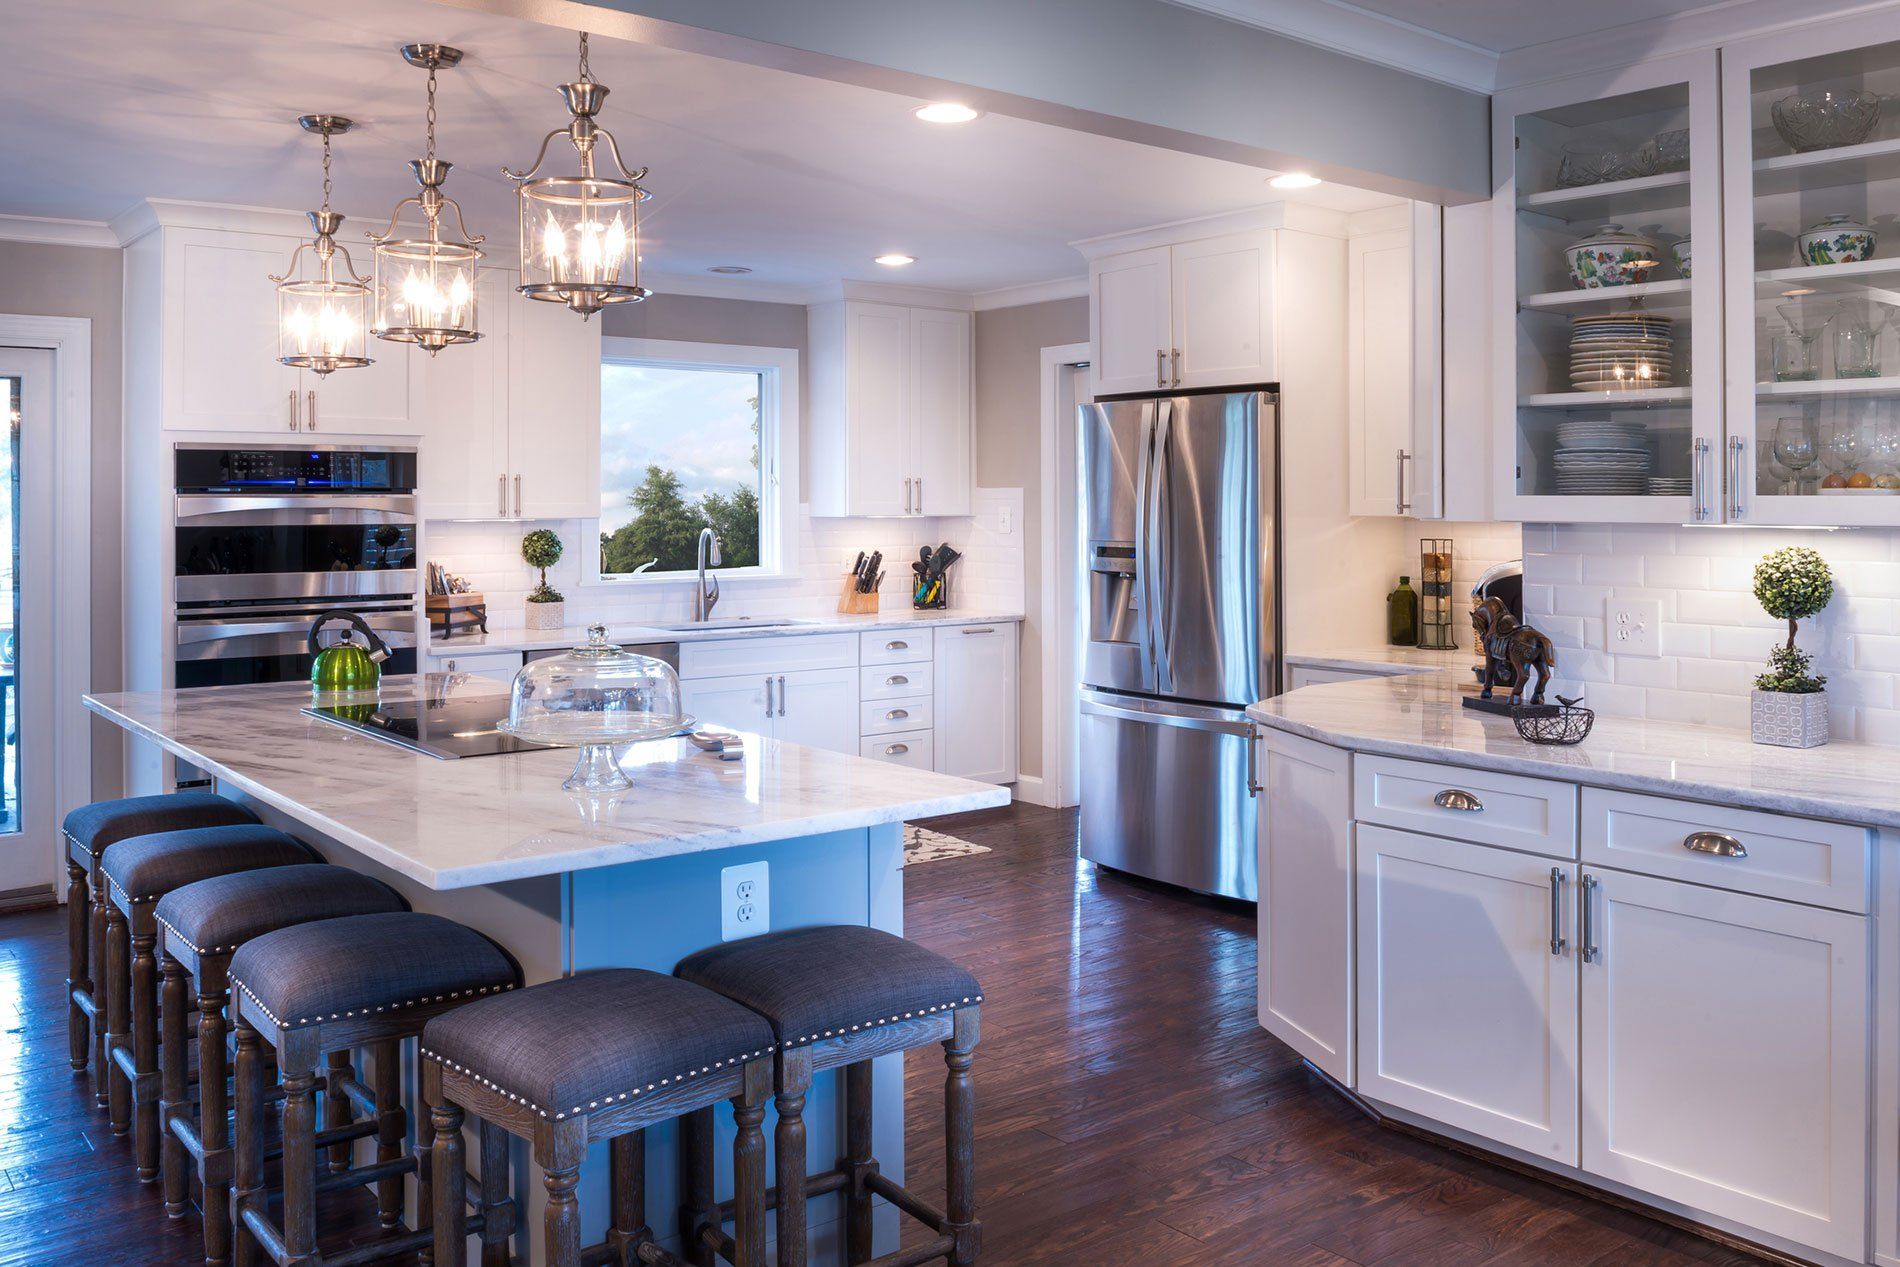 Kitchen Remodeling Trends for 2020